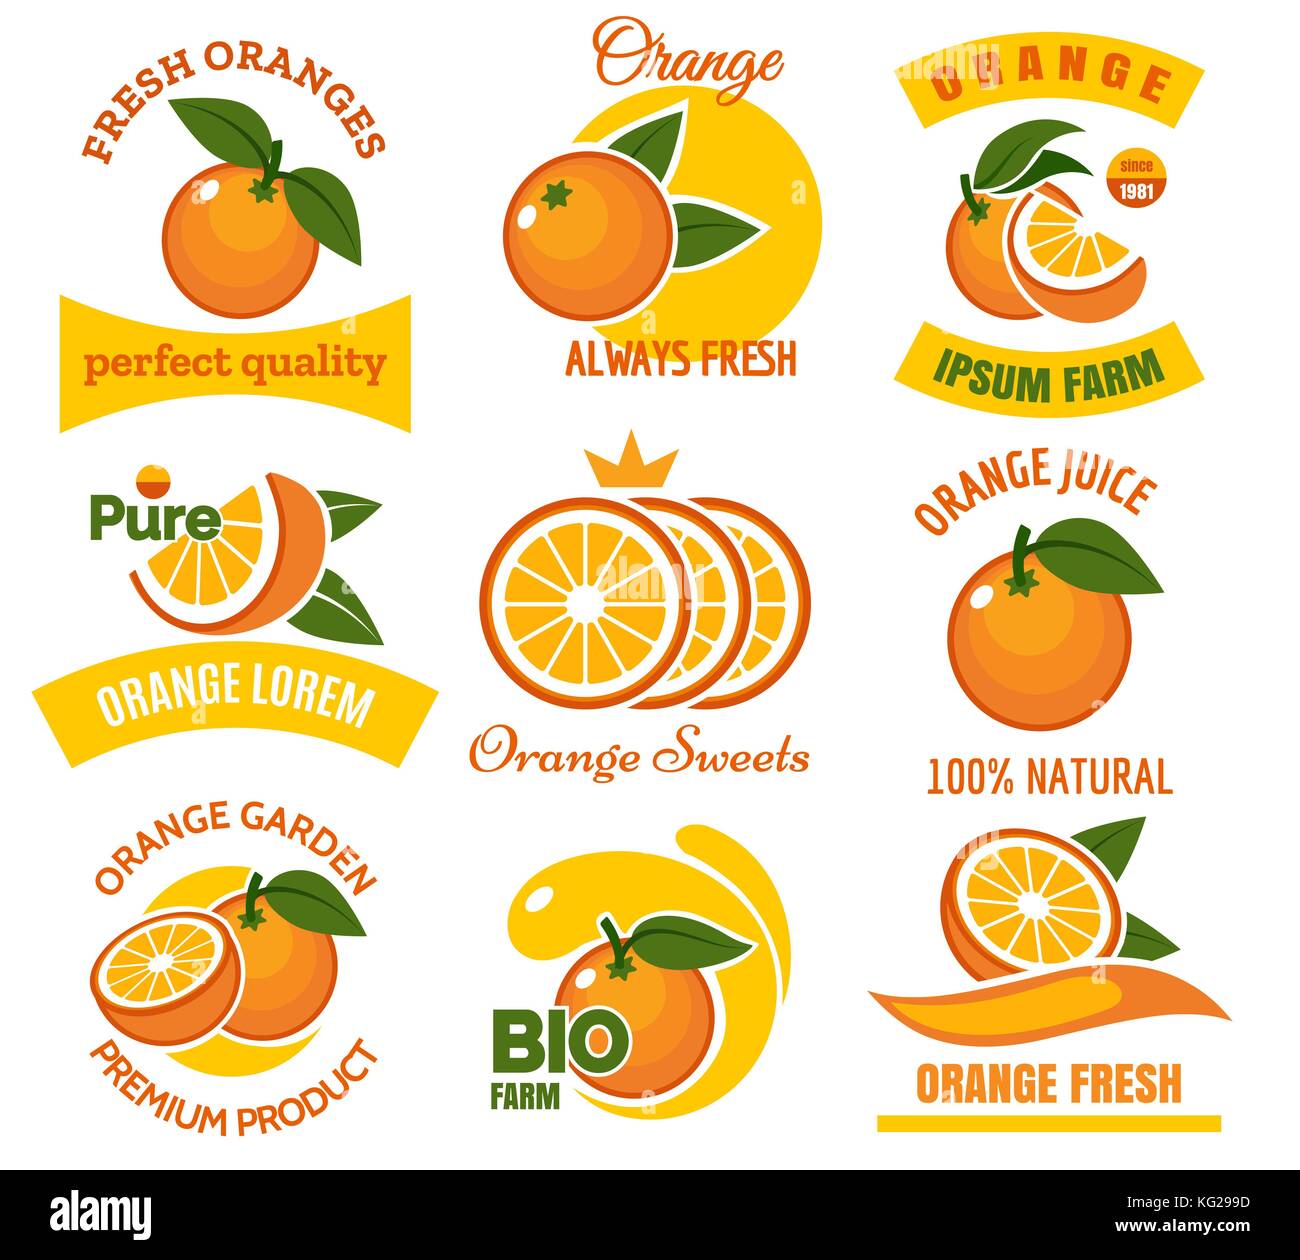 Orange slice products emblems. Cartoon dessert oranges with green leaves fruits graphic logo set isolated on white background Stock Vector